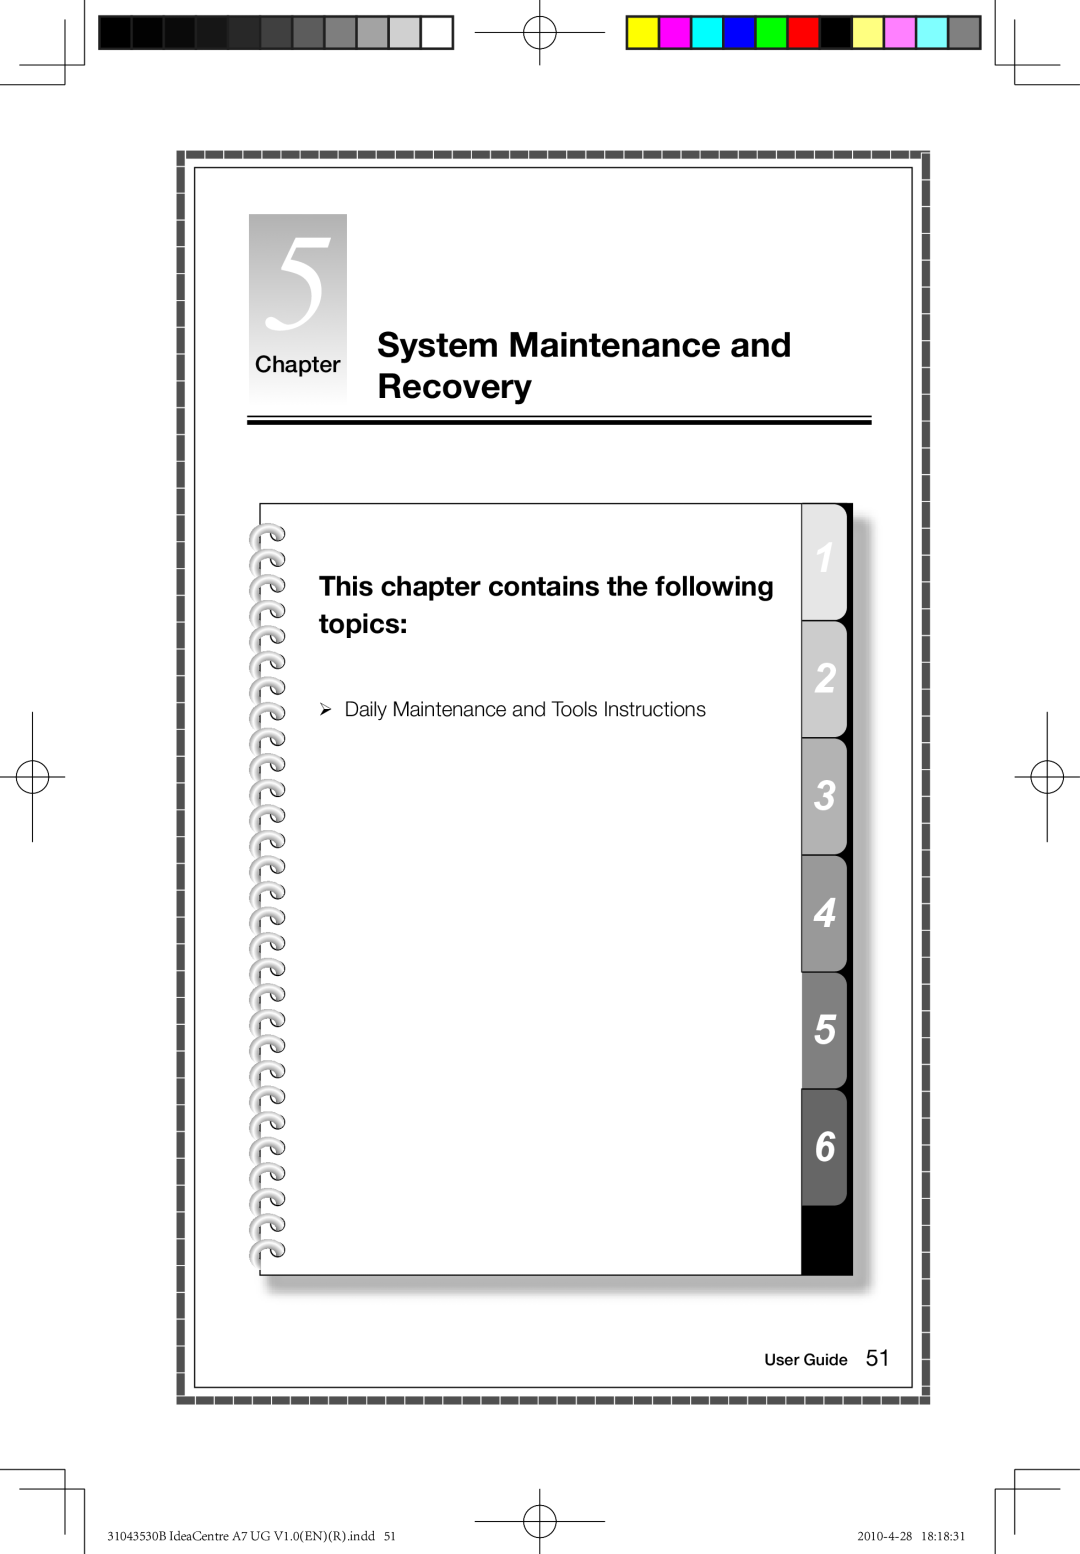 Lenovo A7 System Maintenance and, Recovery, This chapter contains the following topics, Chapter, User Guide, 2010-4-28 